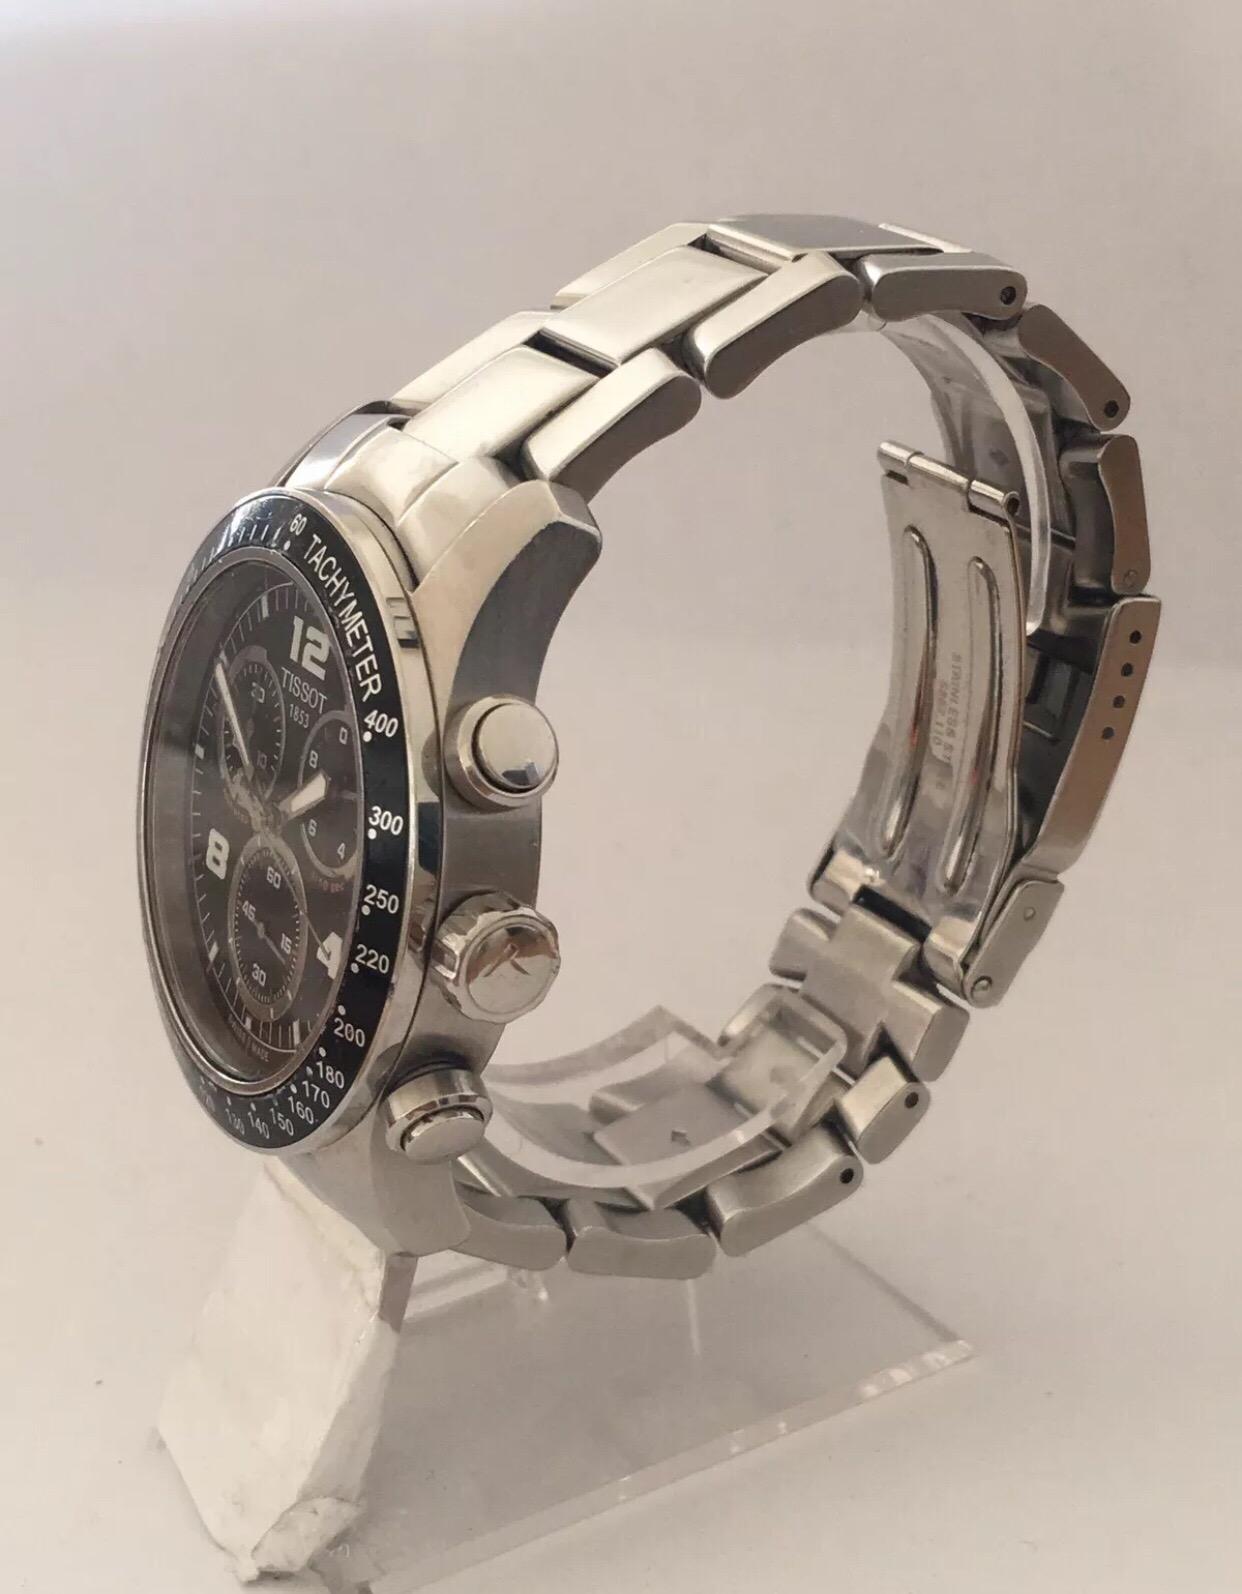 This Pre-owned watch is in Good working condition and is running well. Some worn and small scratches on the watch bessel as shown. Please study the images carefully as form part of the description.